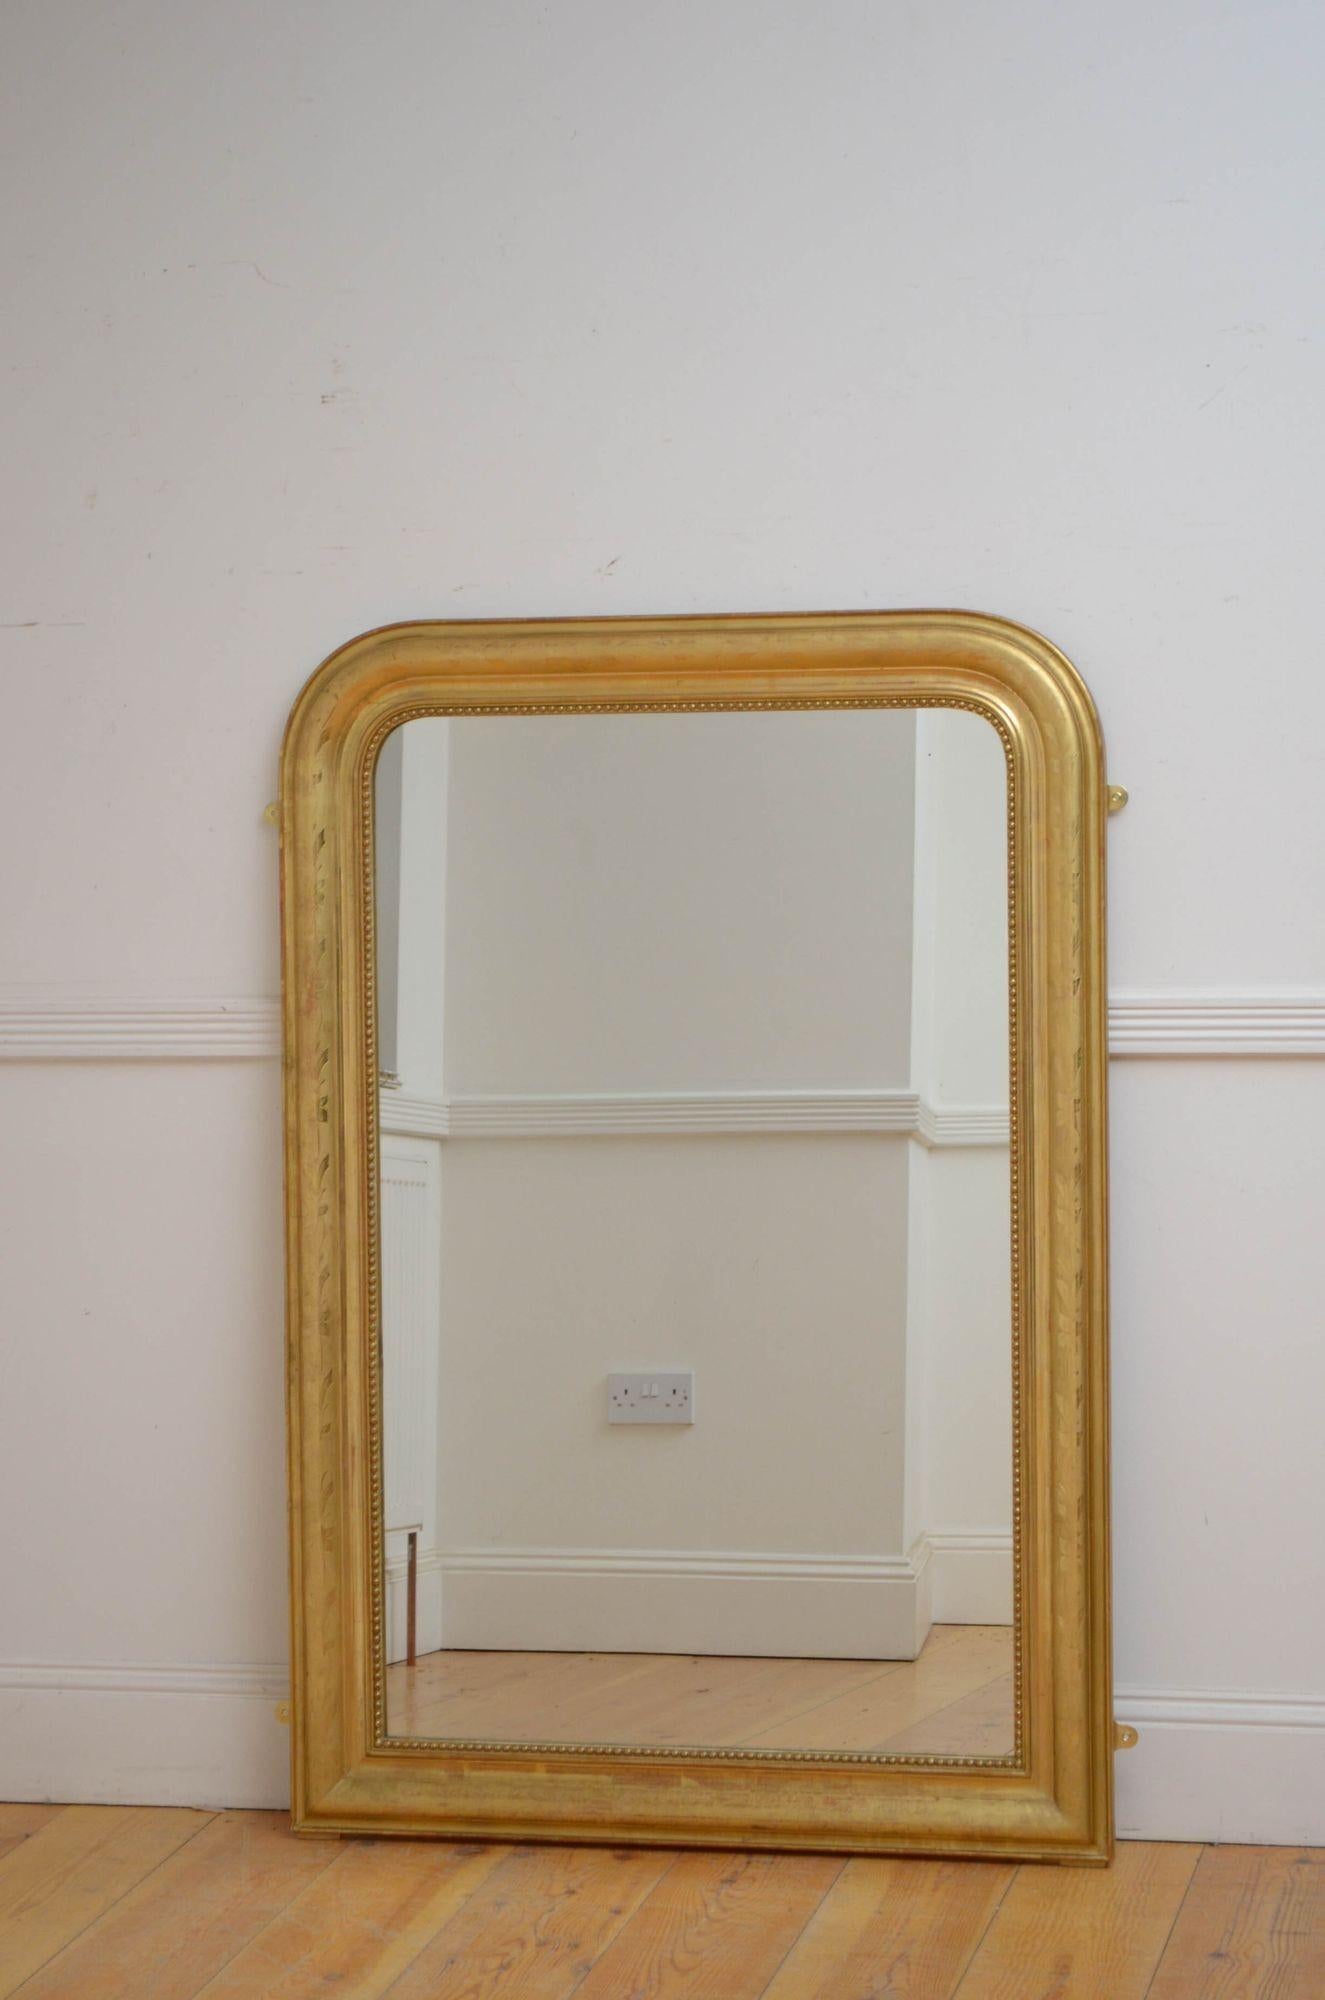 Sn5392 Attractive XIXth century gilt wall or pier mirror, having shaped glass with some imperfections in beaded and moulded frame with etched floral decoration. This antique mirror is in home ready condition. c1860
H53